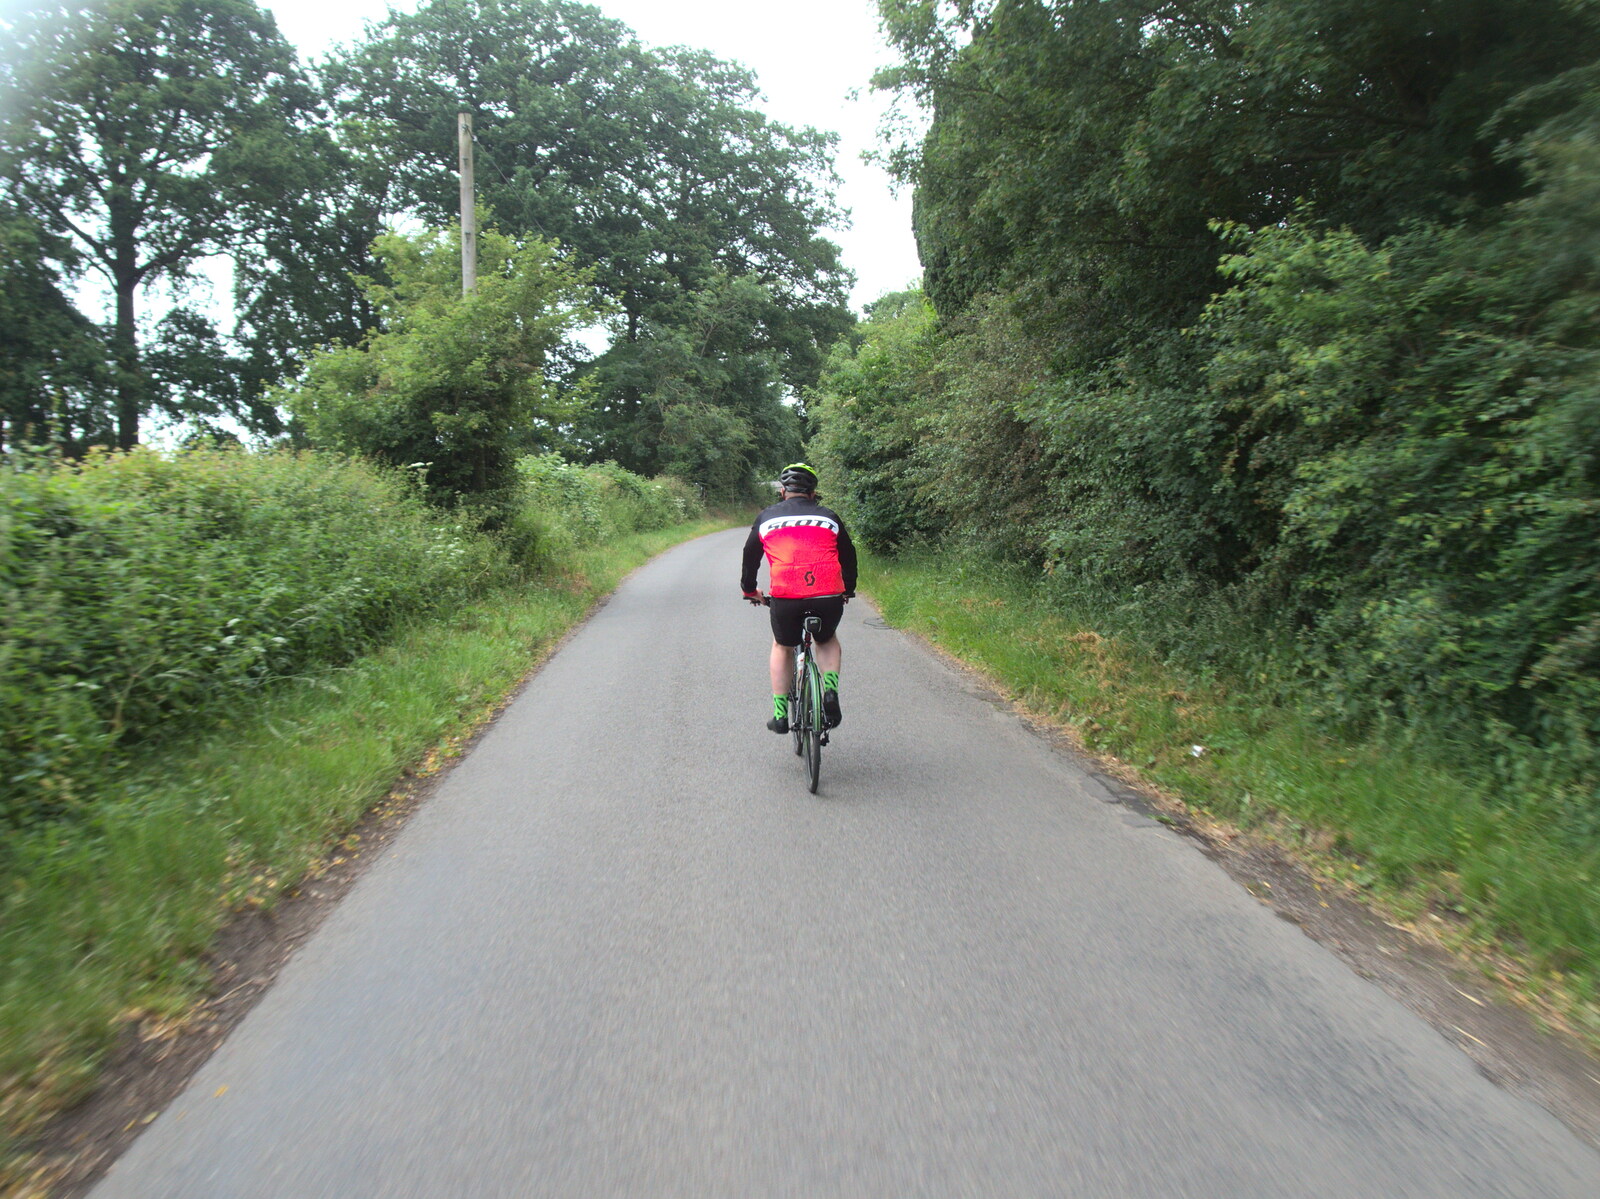 Gaz on the road to Pulham from A BSCC Ride to Pulham Market, Norfolk - 17th June 2021